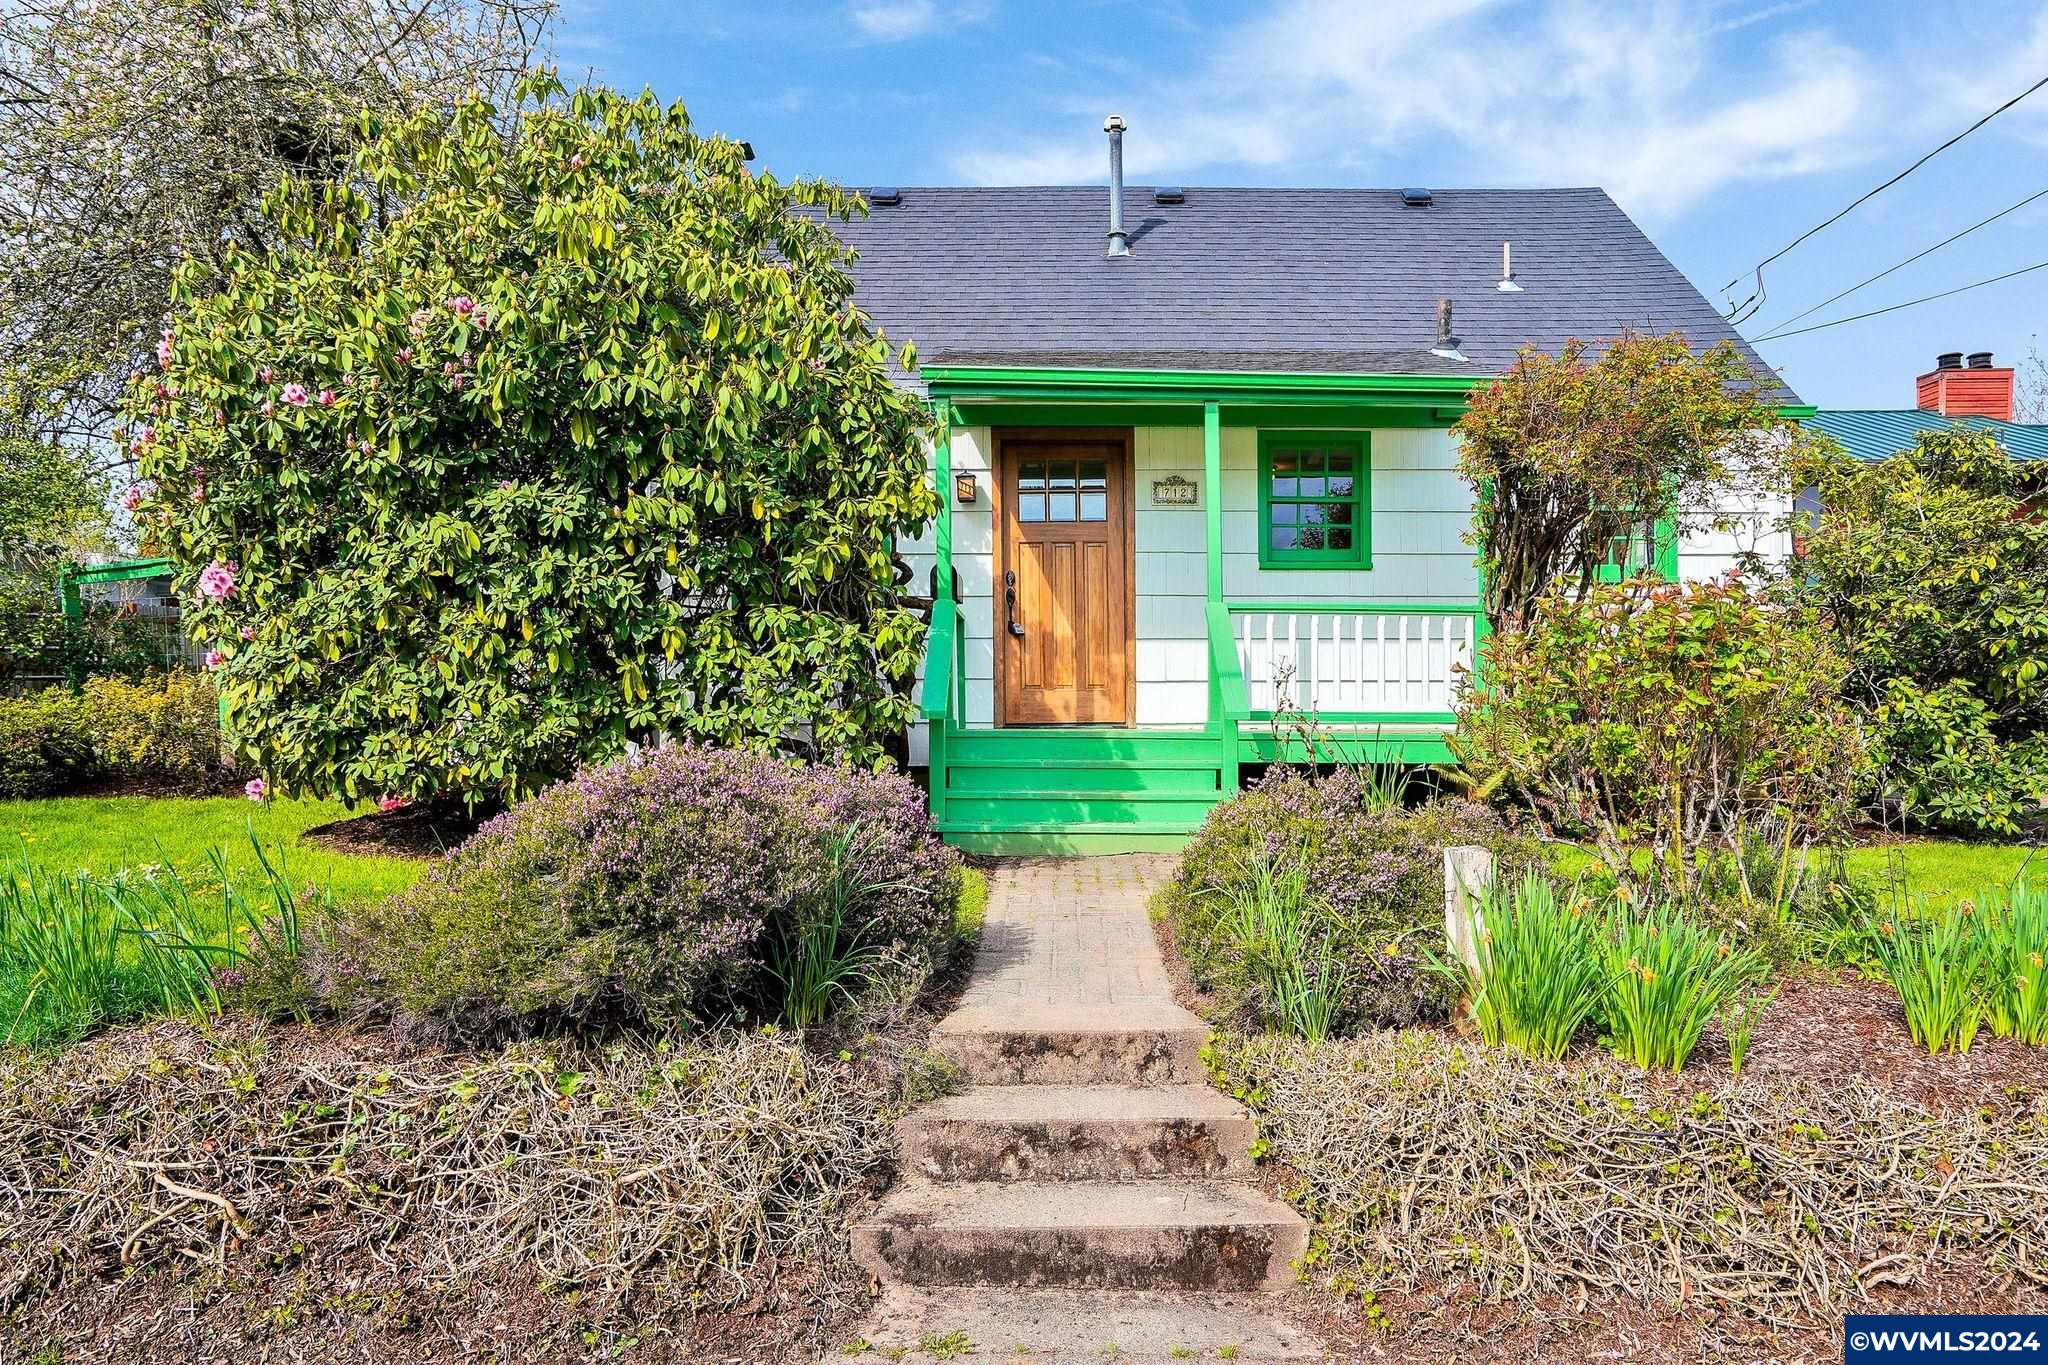 Cute cottage close to campus!  This 3 bed 1 bath has hardwood floors, woodstove, built in cabinets and lots of character.  Large yard with fruit trees and plenty of gardening space.  Carport and shed.   2019 sewer line replacement.  2014 Roof replacement. All close to shopping, campus, downtown and more.